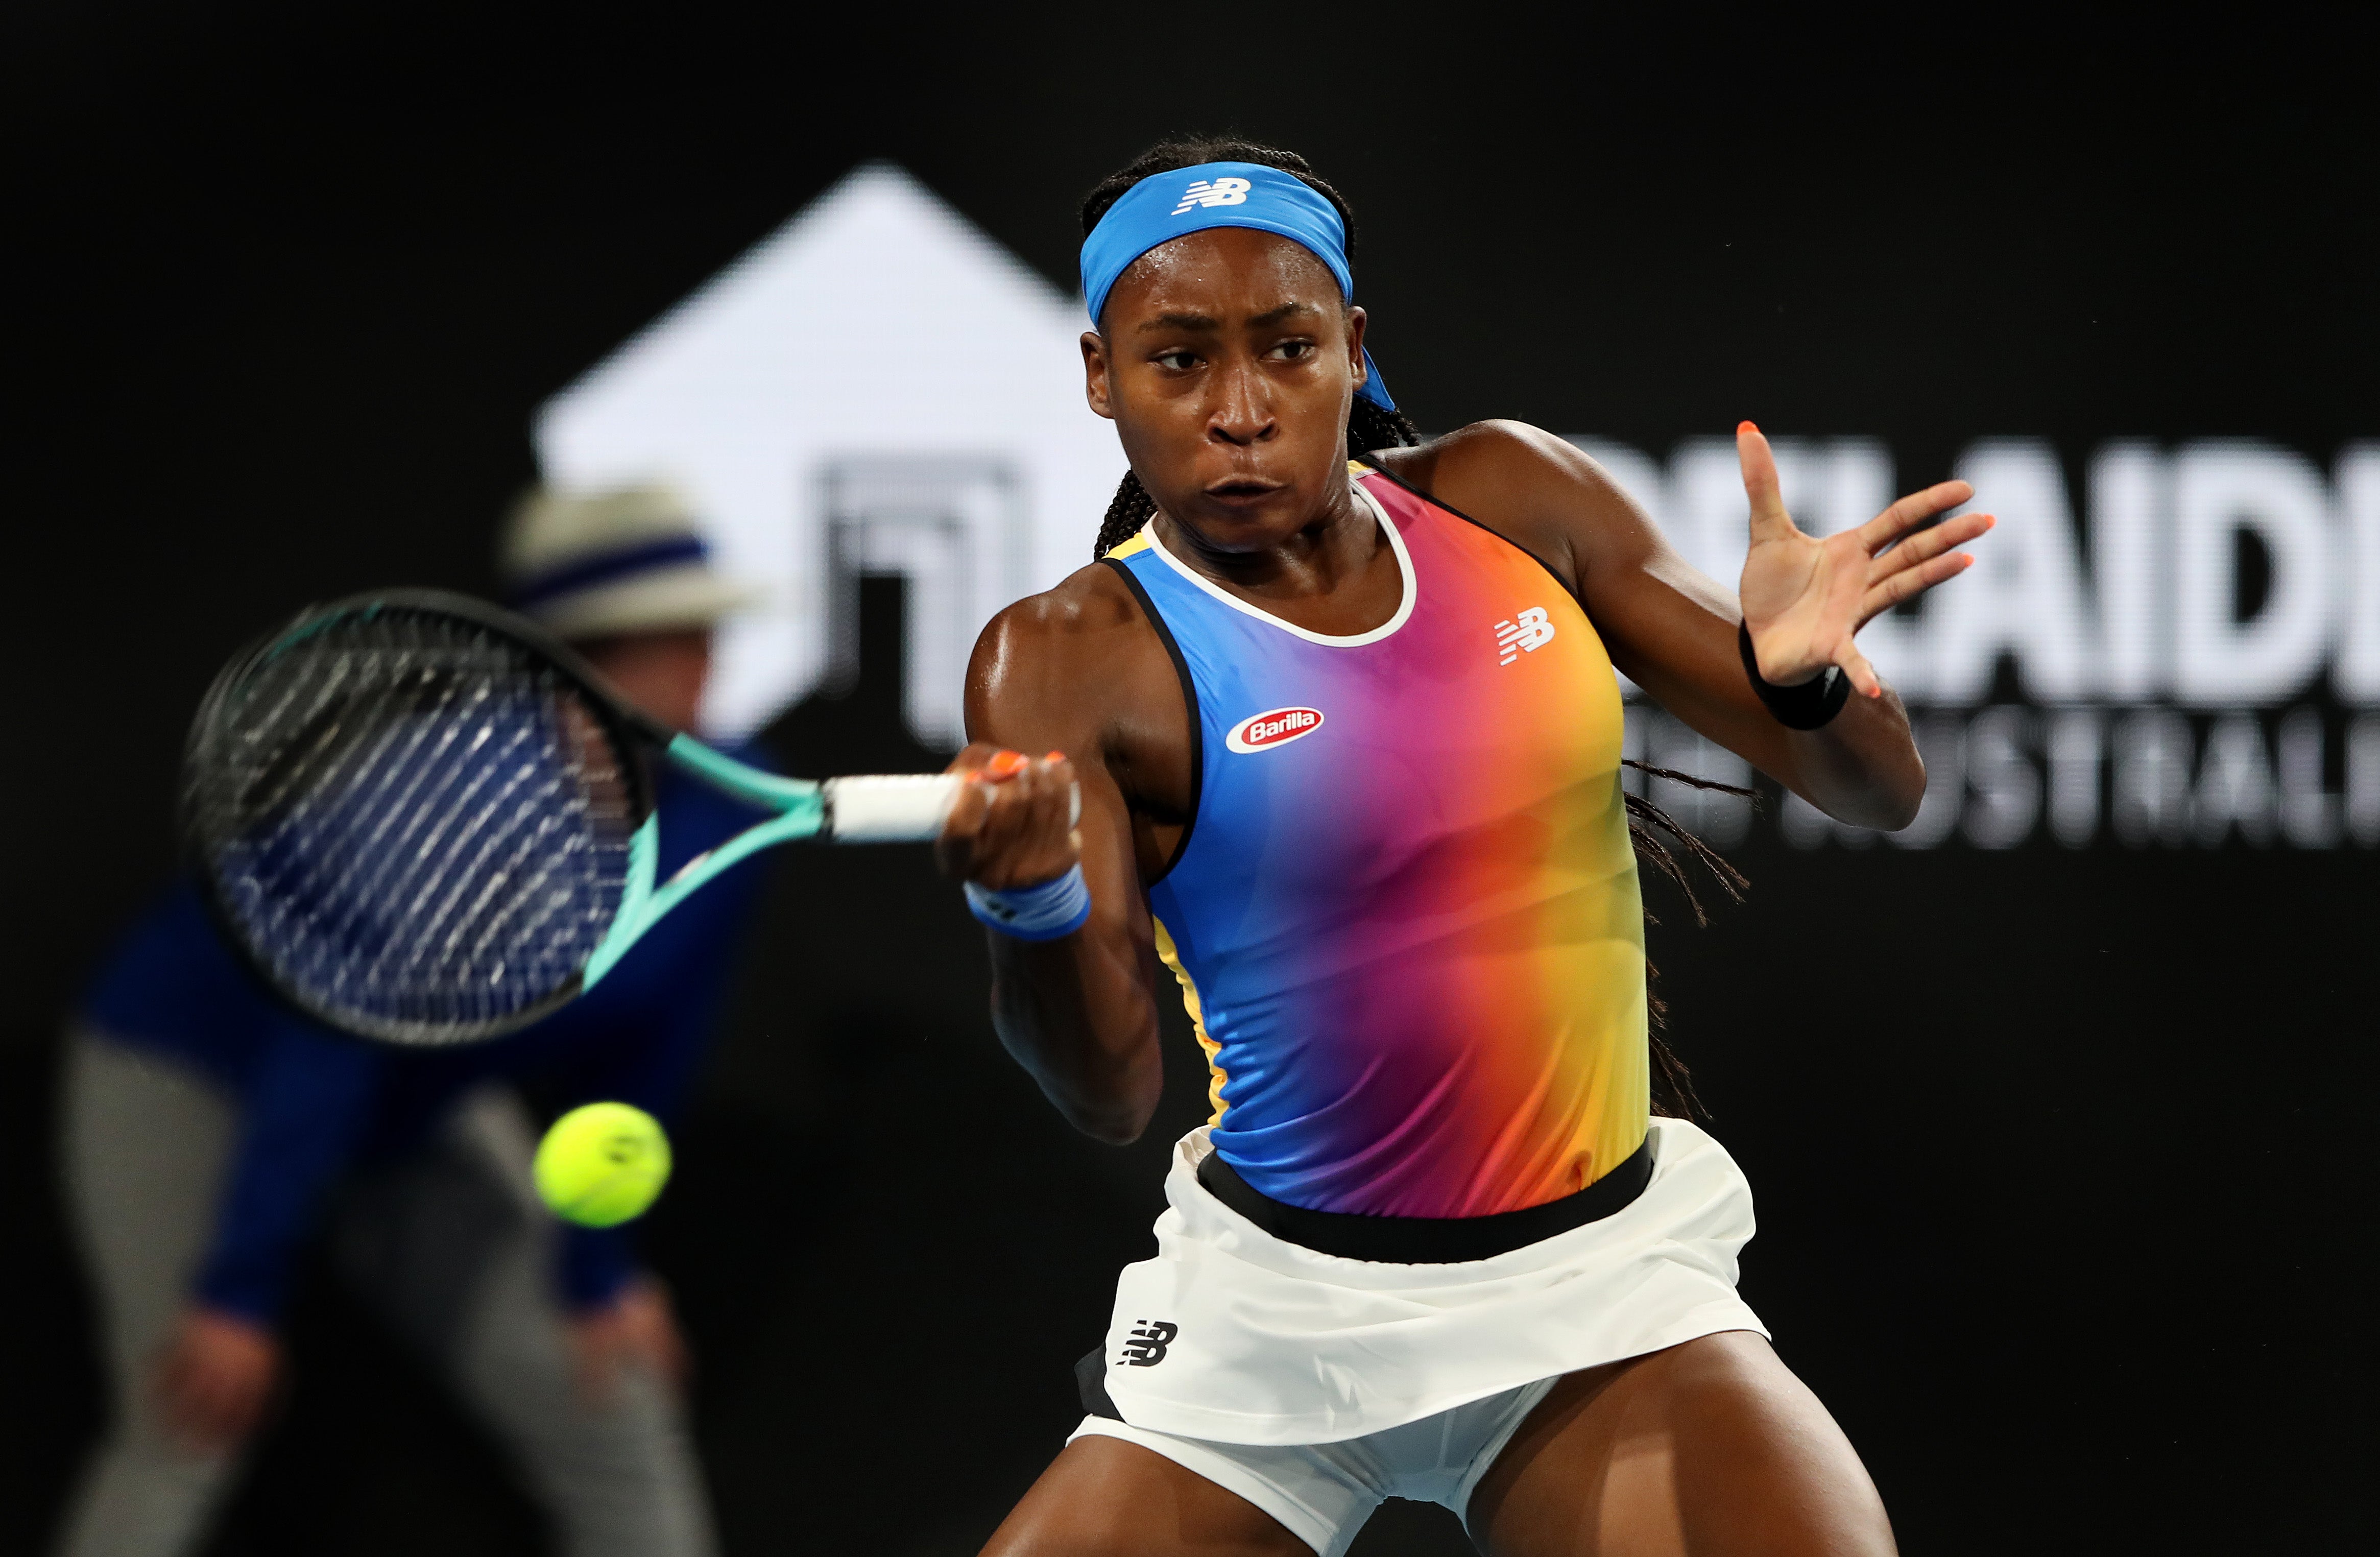 Coco Gauff 2023 biography, Career, Net Worth, earnings and titles